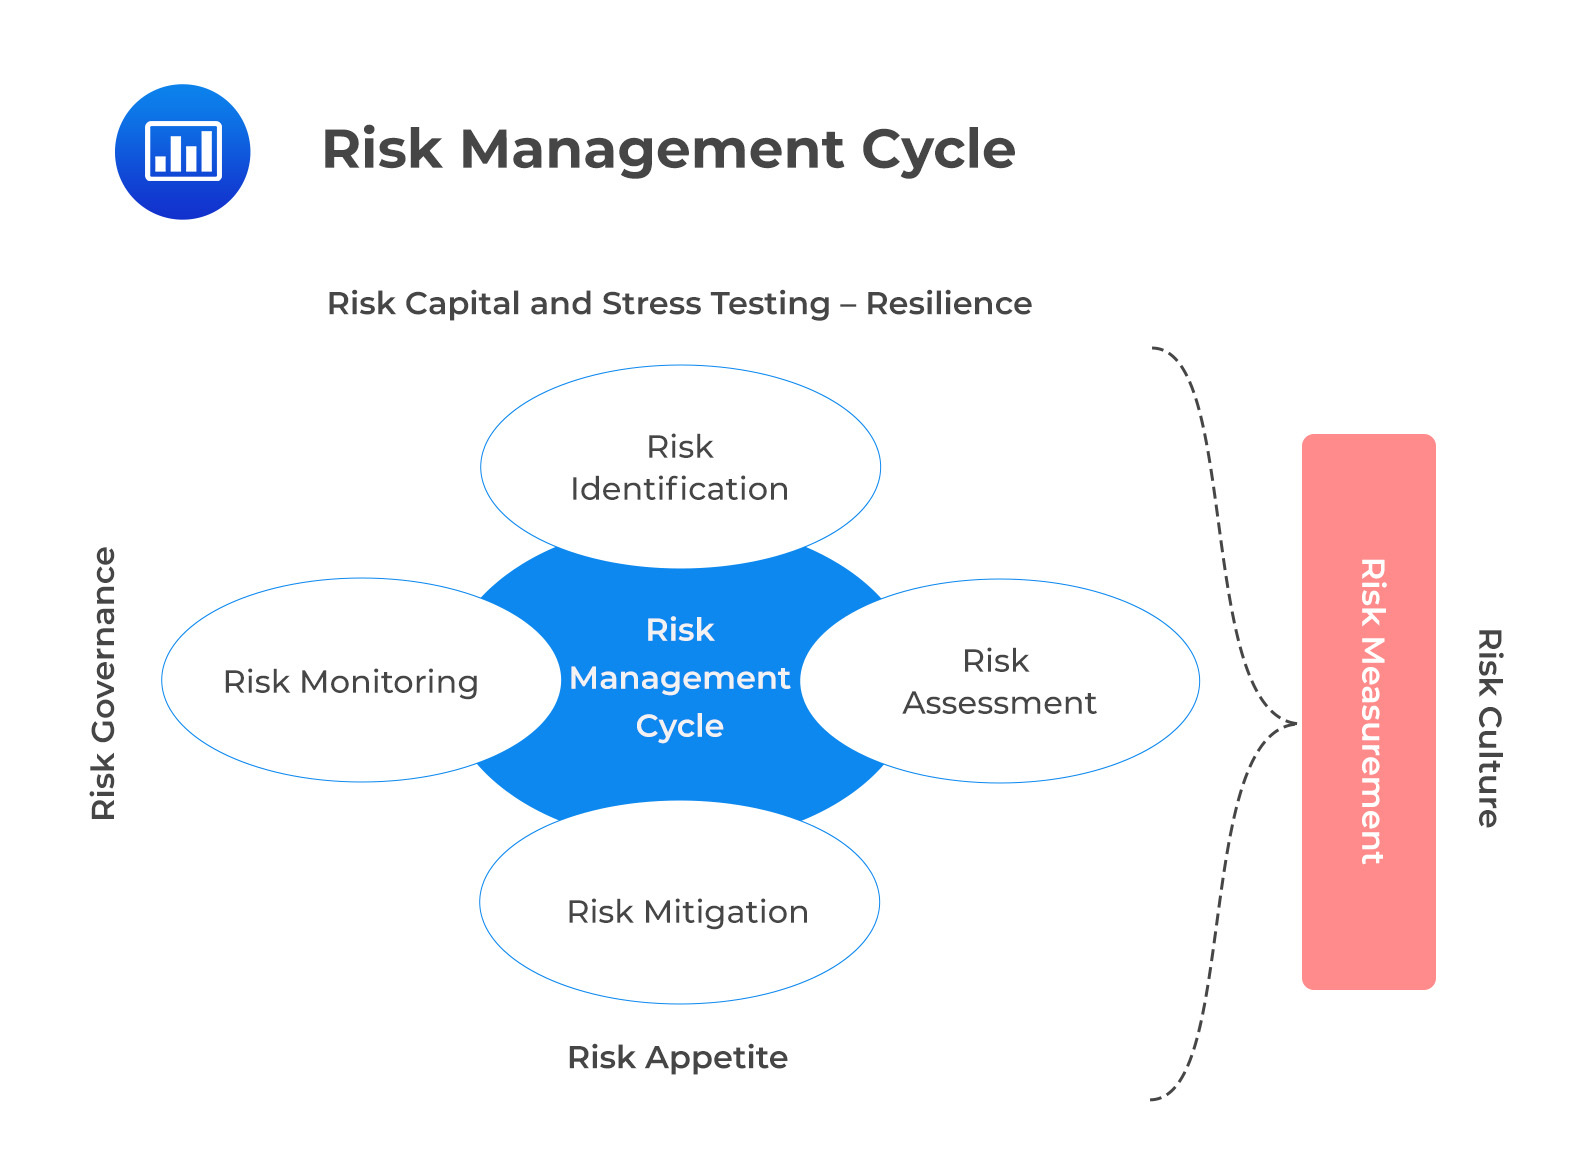 Risk management cycle